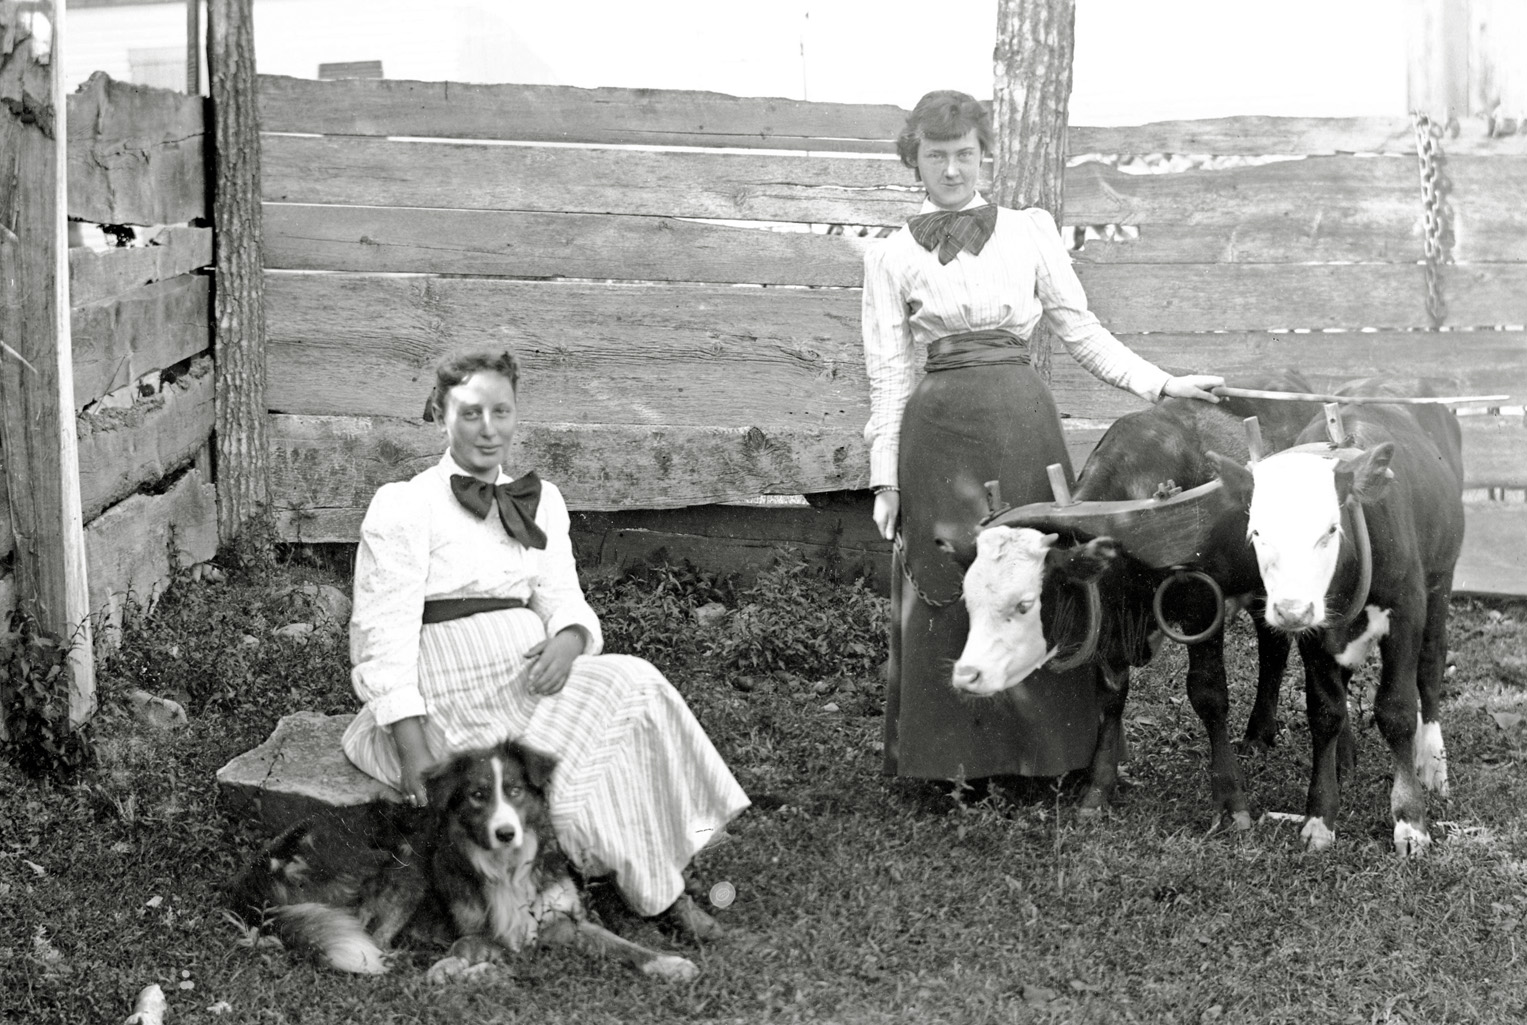 Two beautiful girls in the calf pen with a couple of young calves. Beautiful dresses and lovely girls from long ago on this old glass negative found in Maine. View full size.